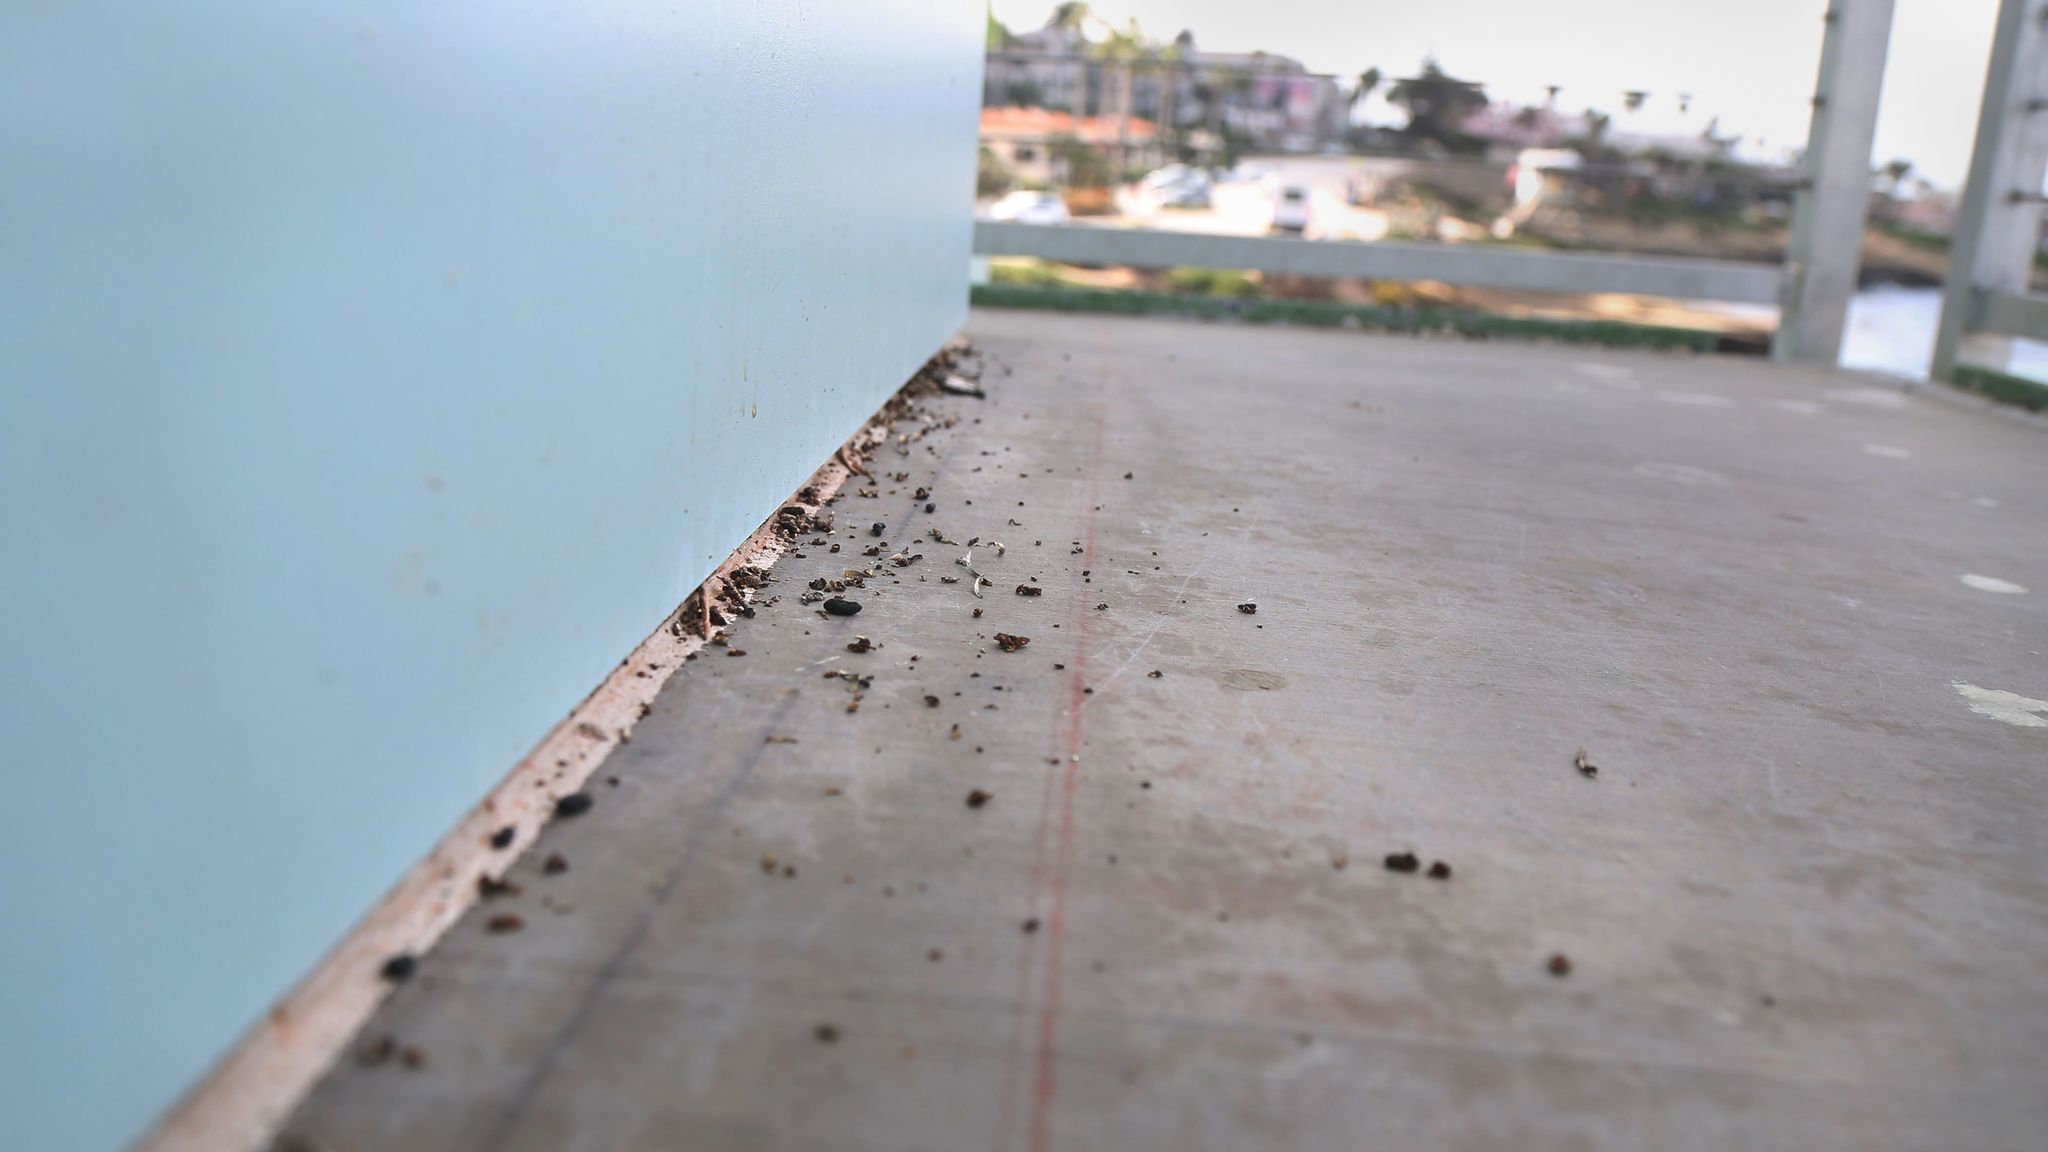 The Lifeguard tower at Children's Pool in La Jolla opened to the public in June, and promptly closed again three weeks later with a myriad problems, including a rat infestation in the walls.